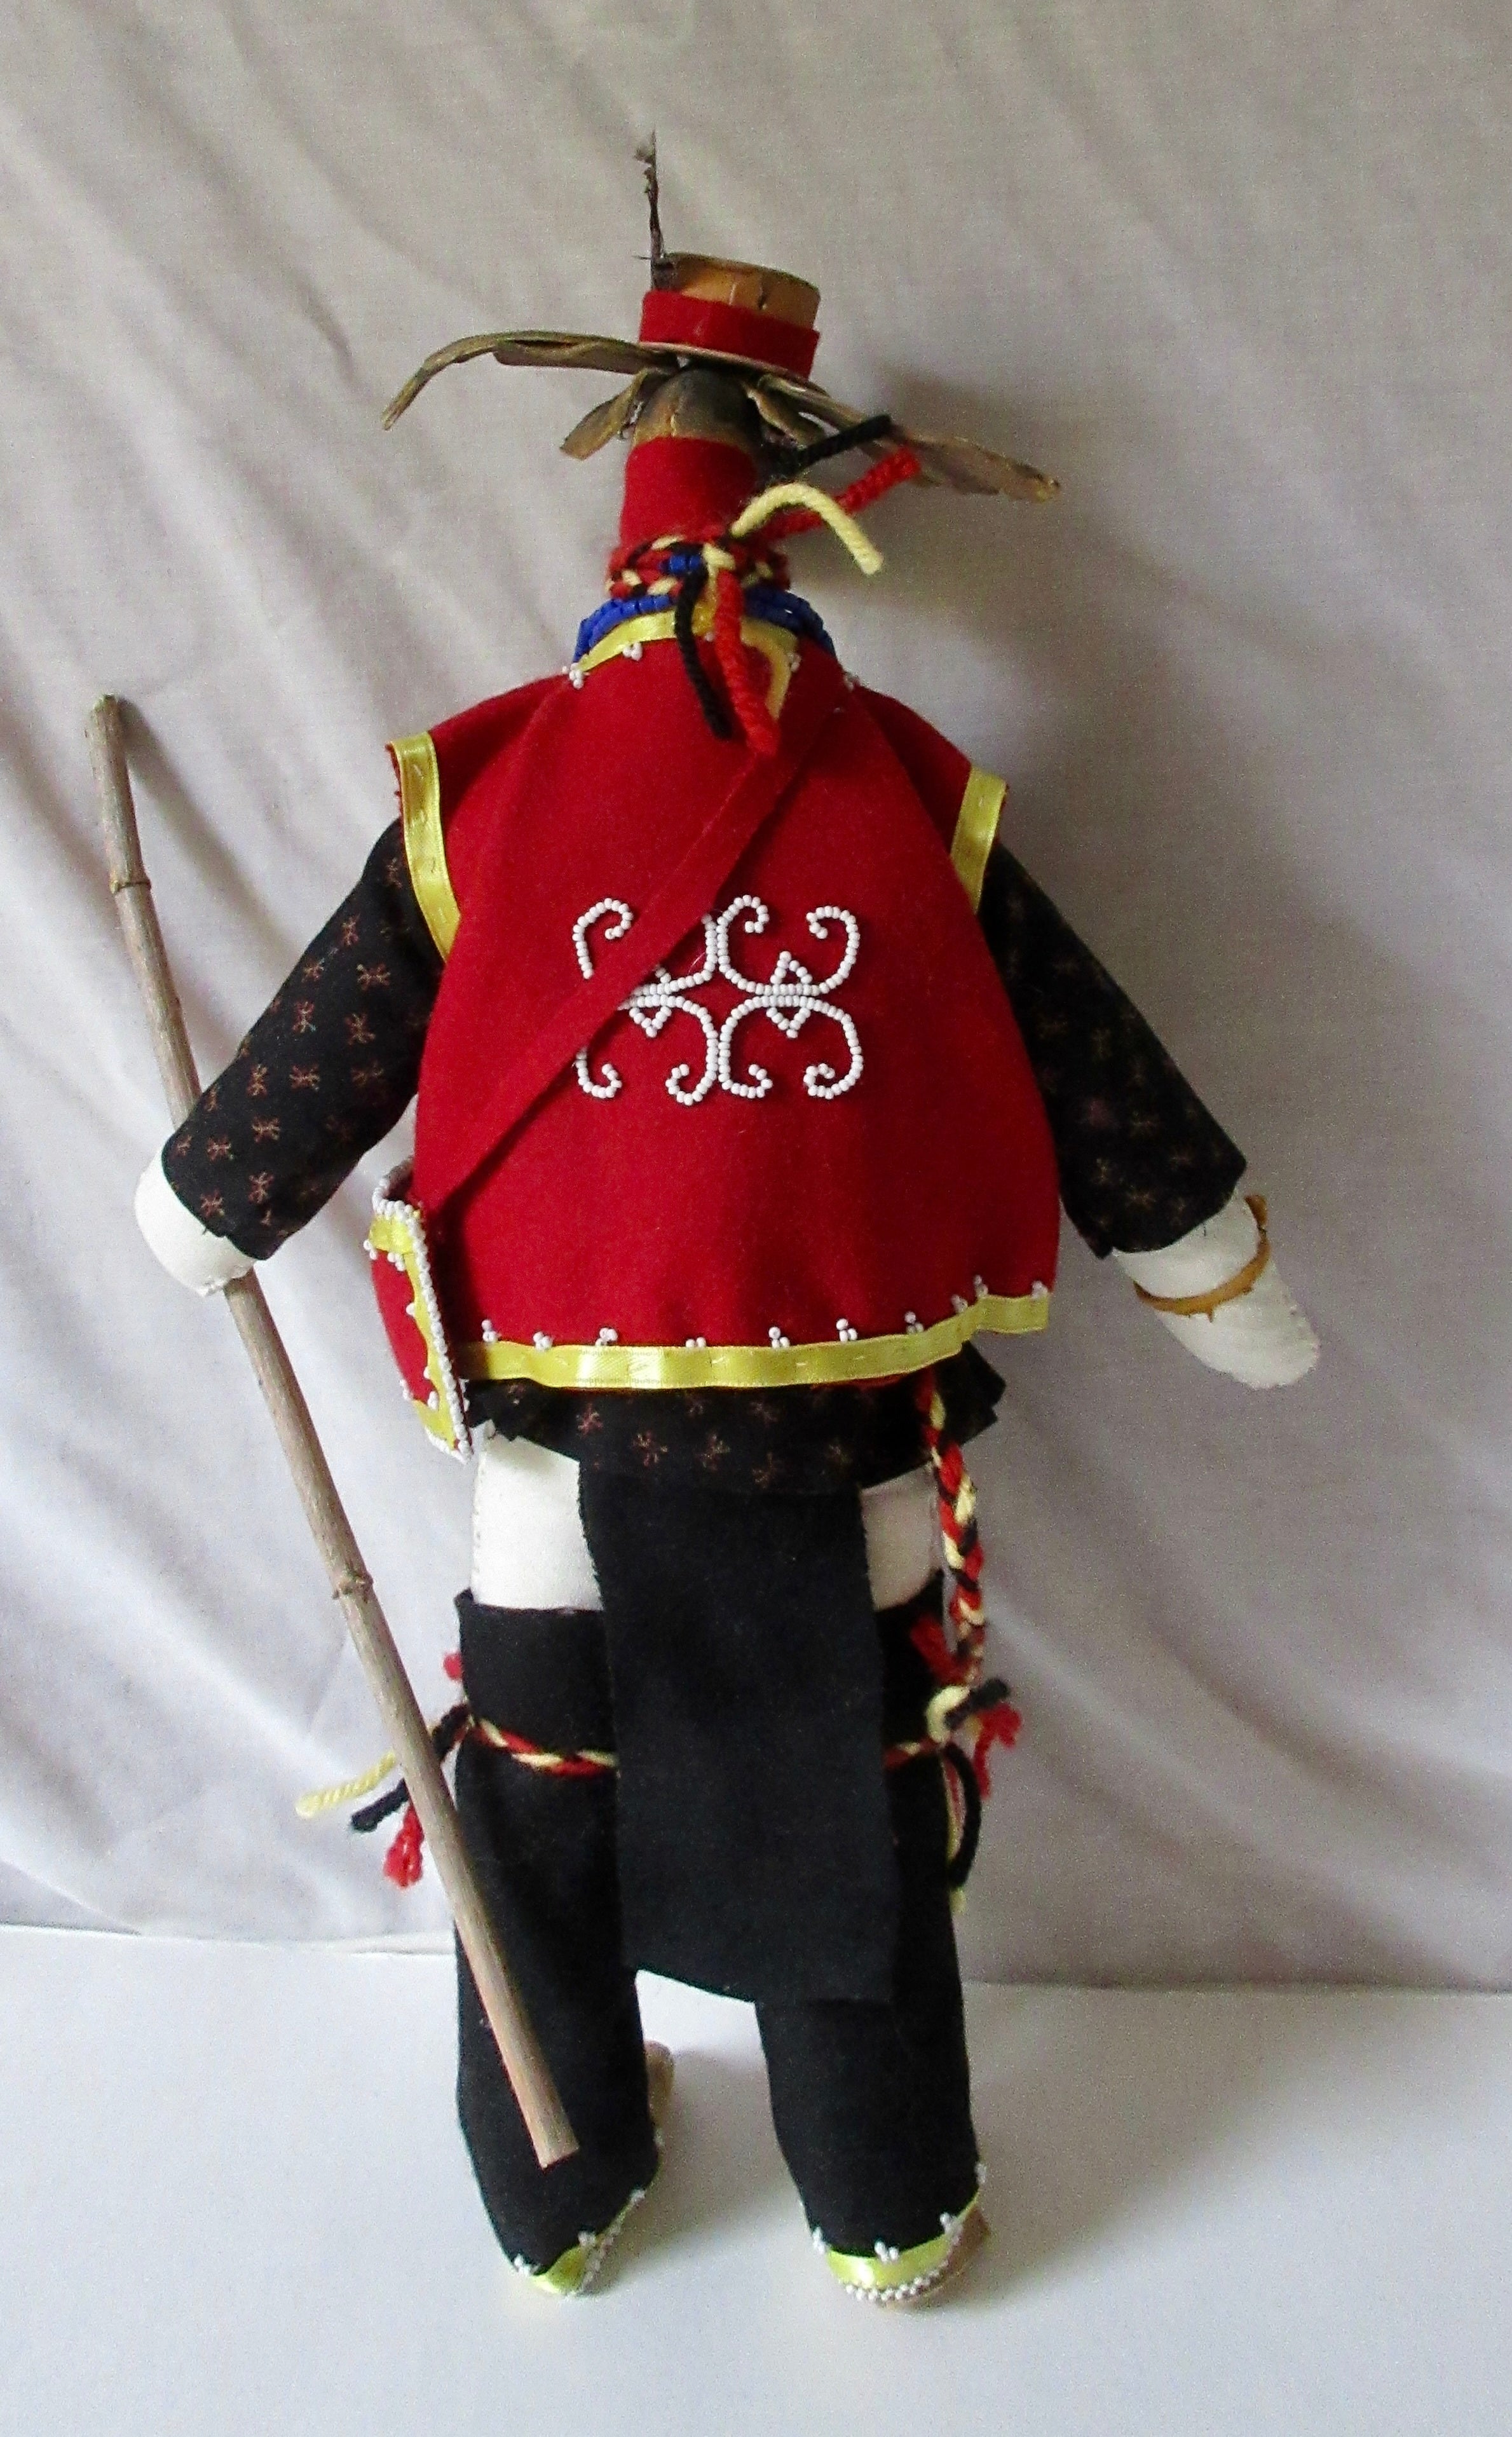 Traditional Mohawk Clothing